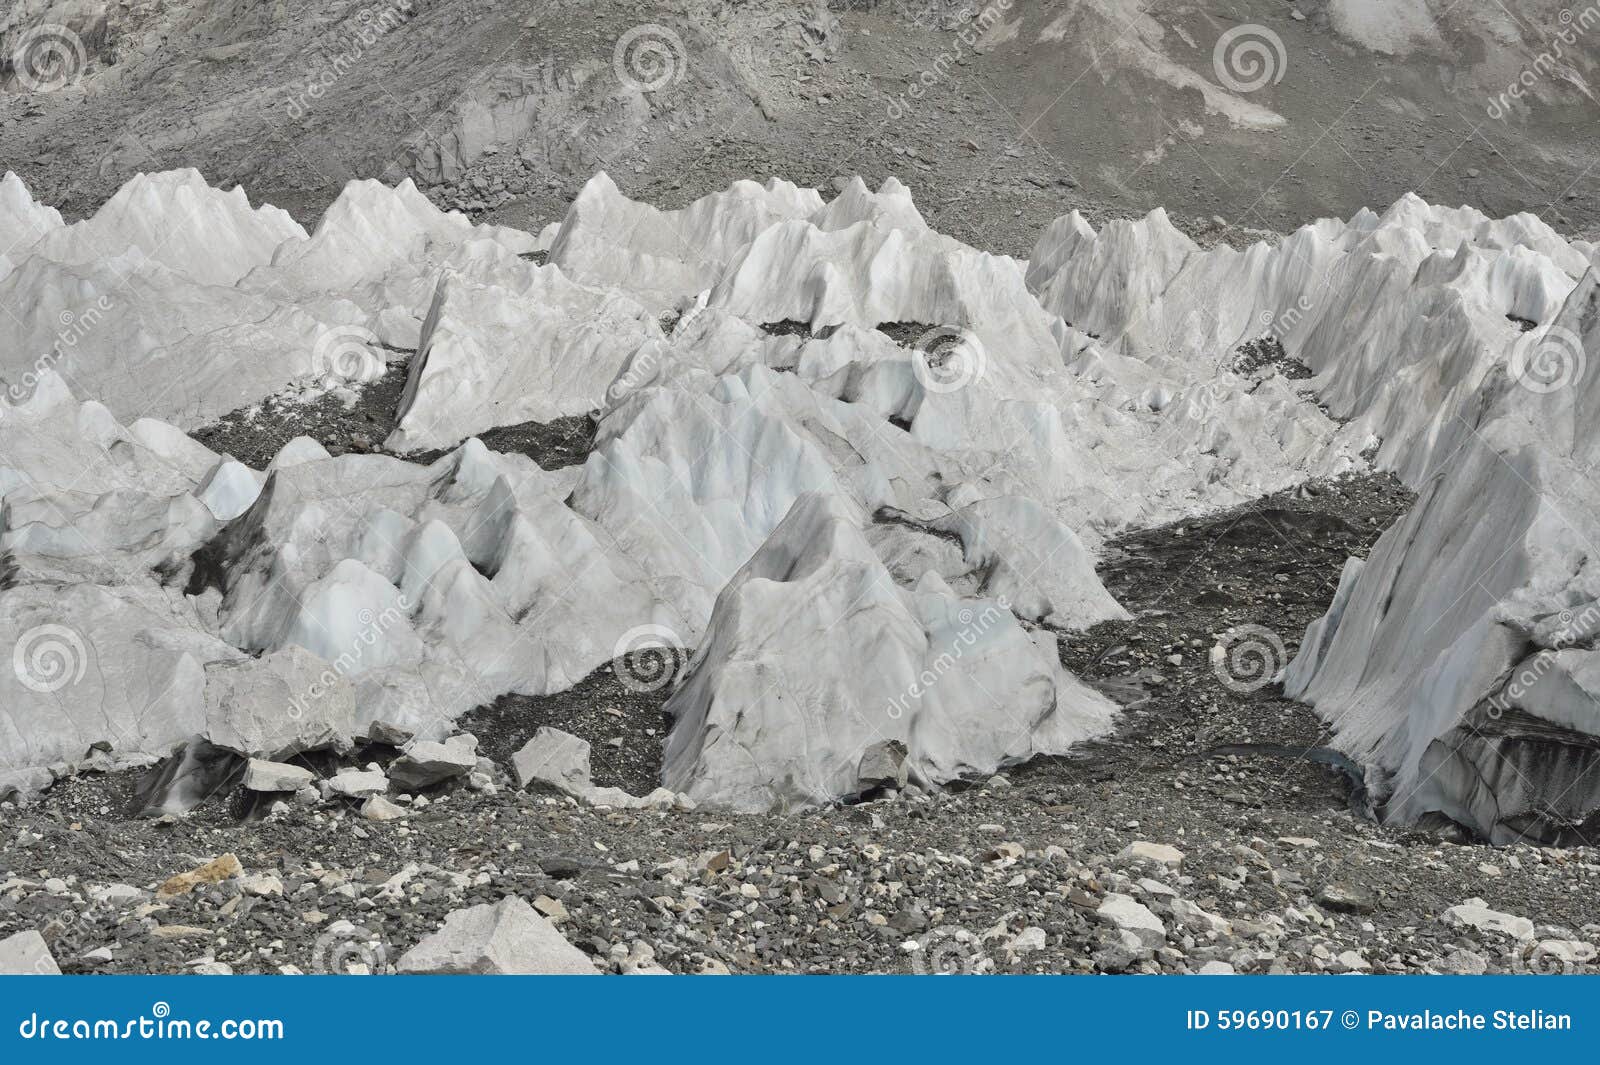 ice and stones from deep valley of khumbu glacier from everest base camp, himalaya. nepal